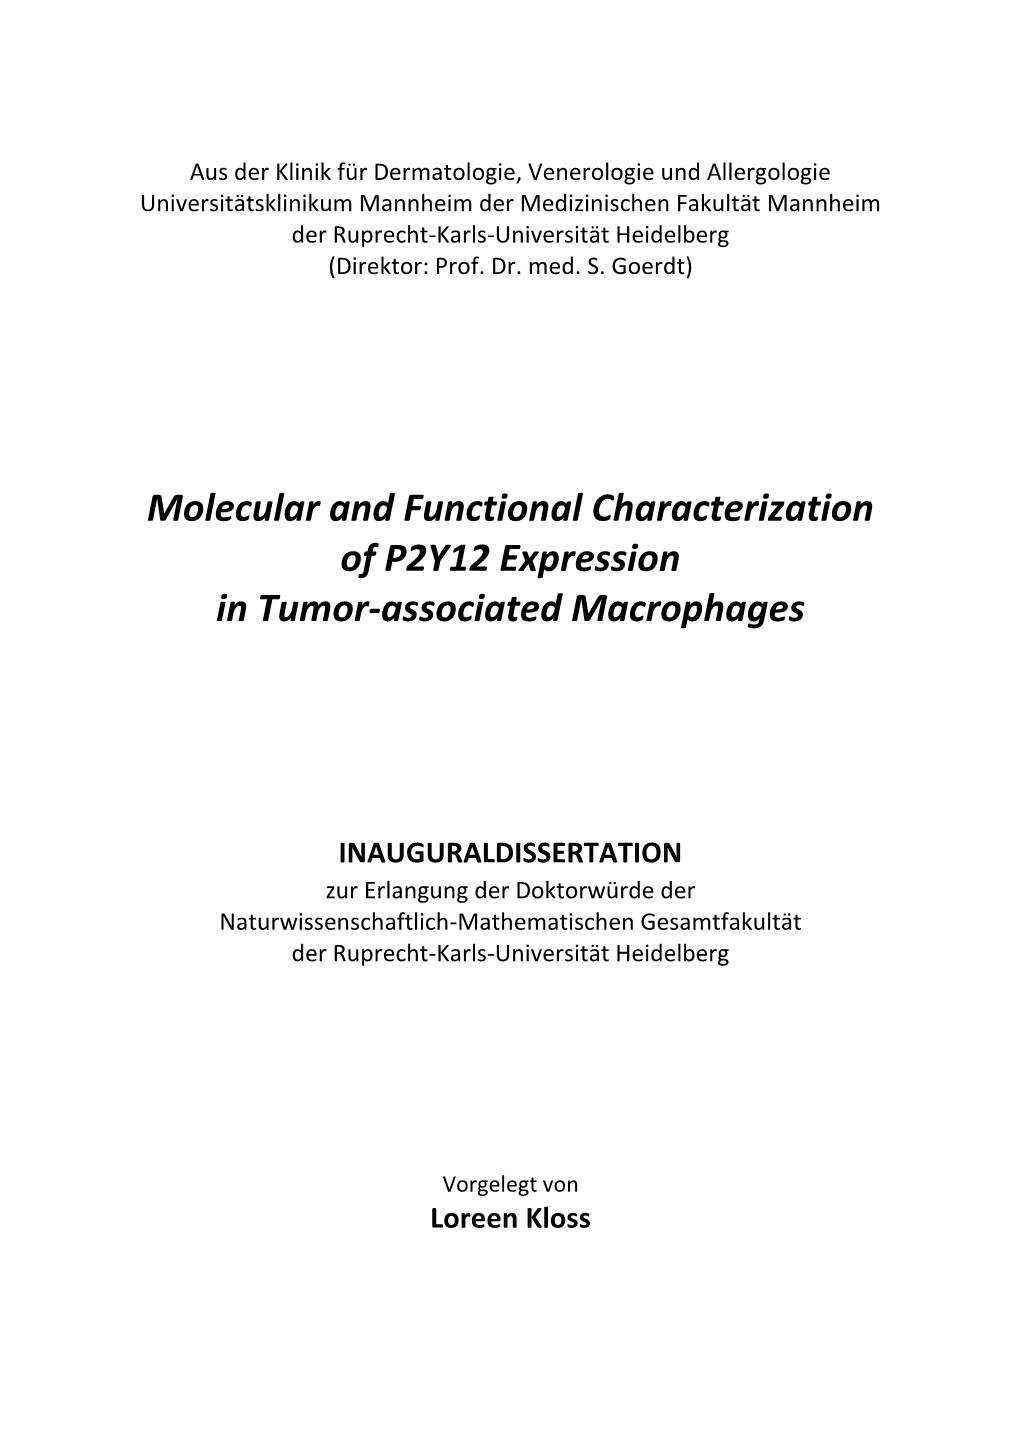 Molecular and Functional Characterization of P2Y12 Expression in Tumor-Associated Macrophages